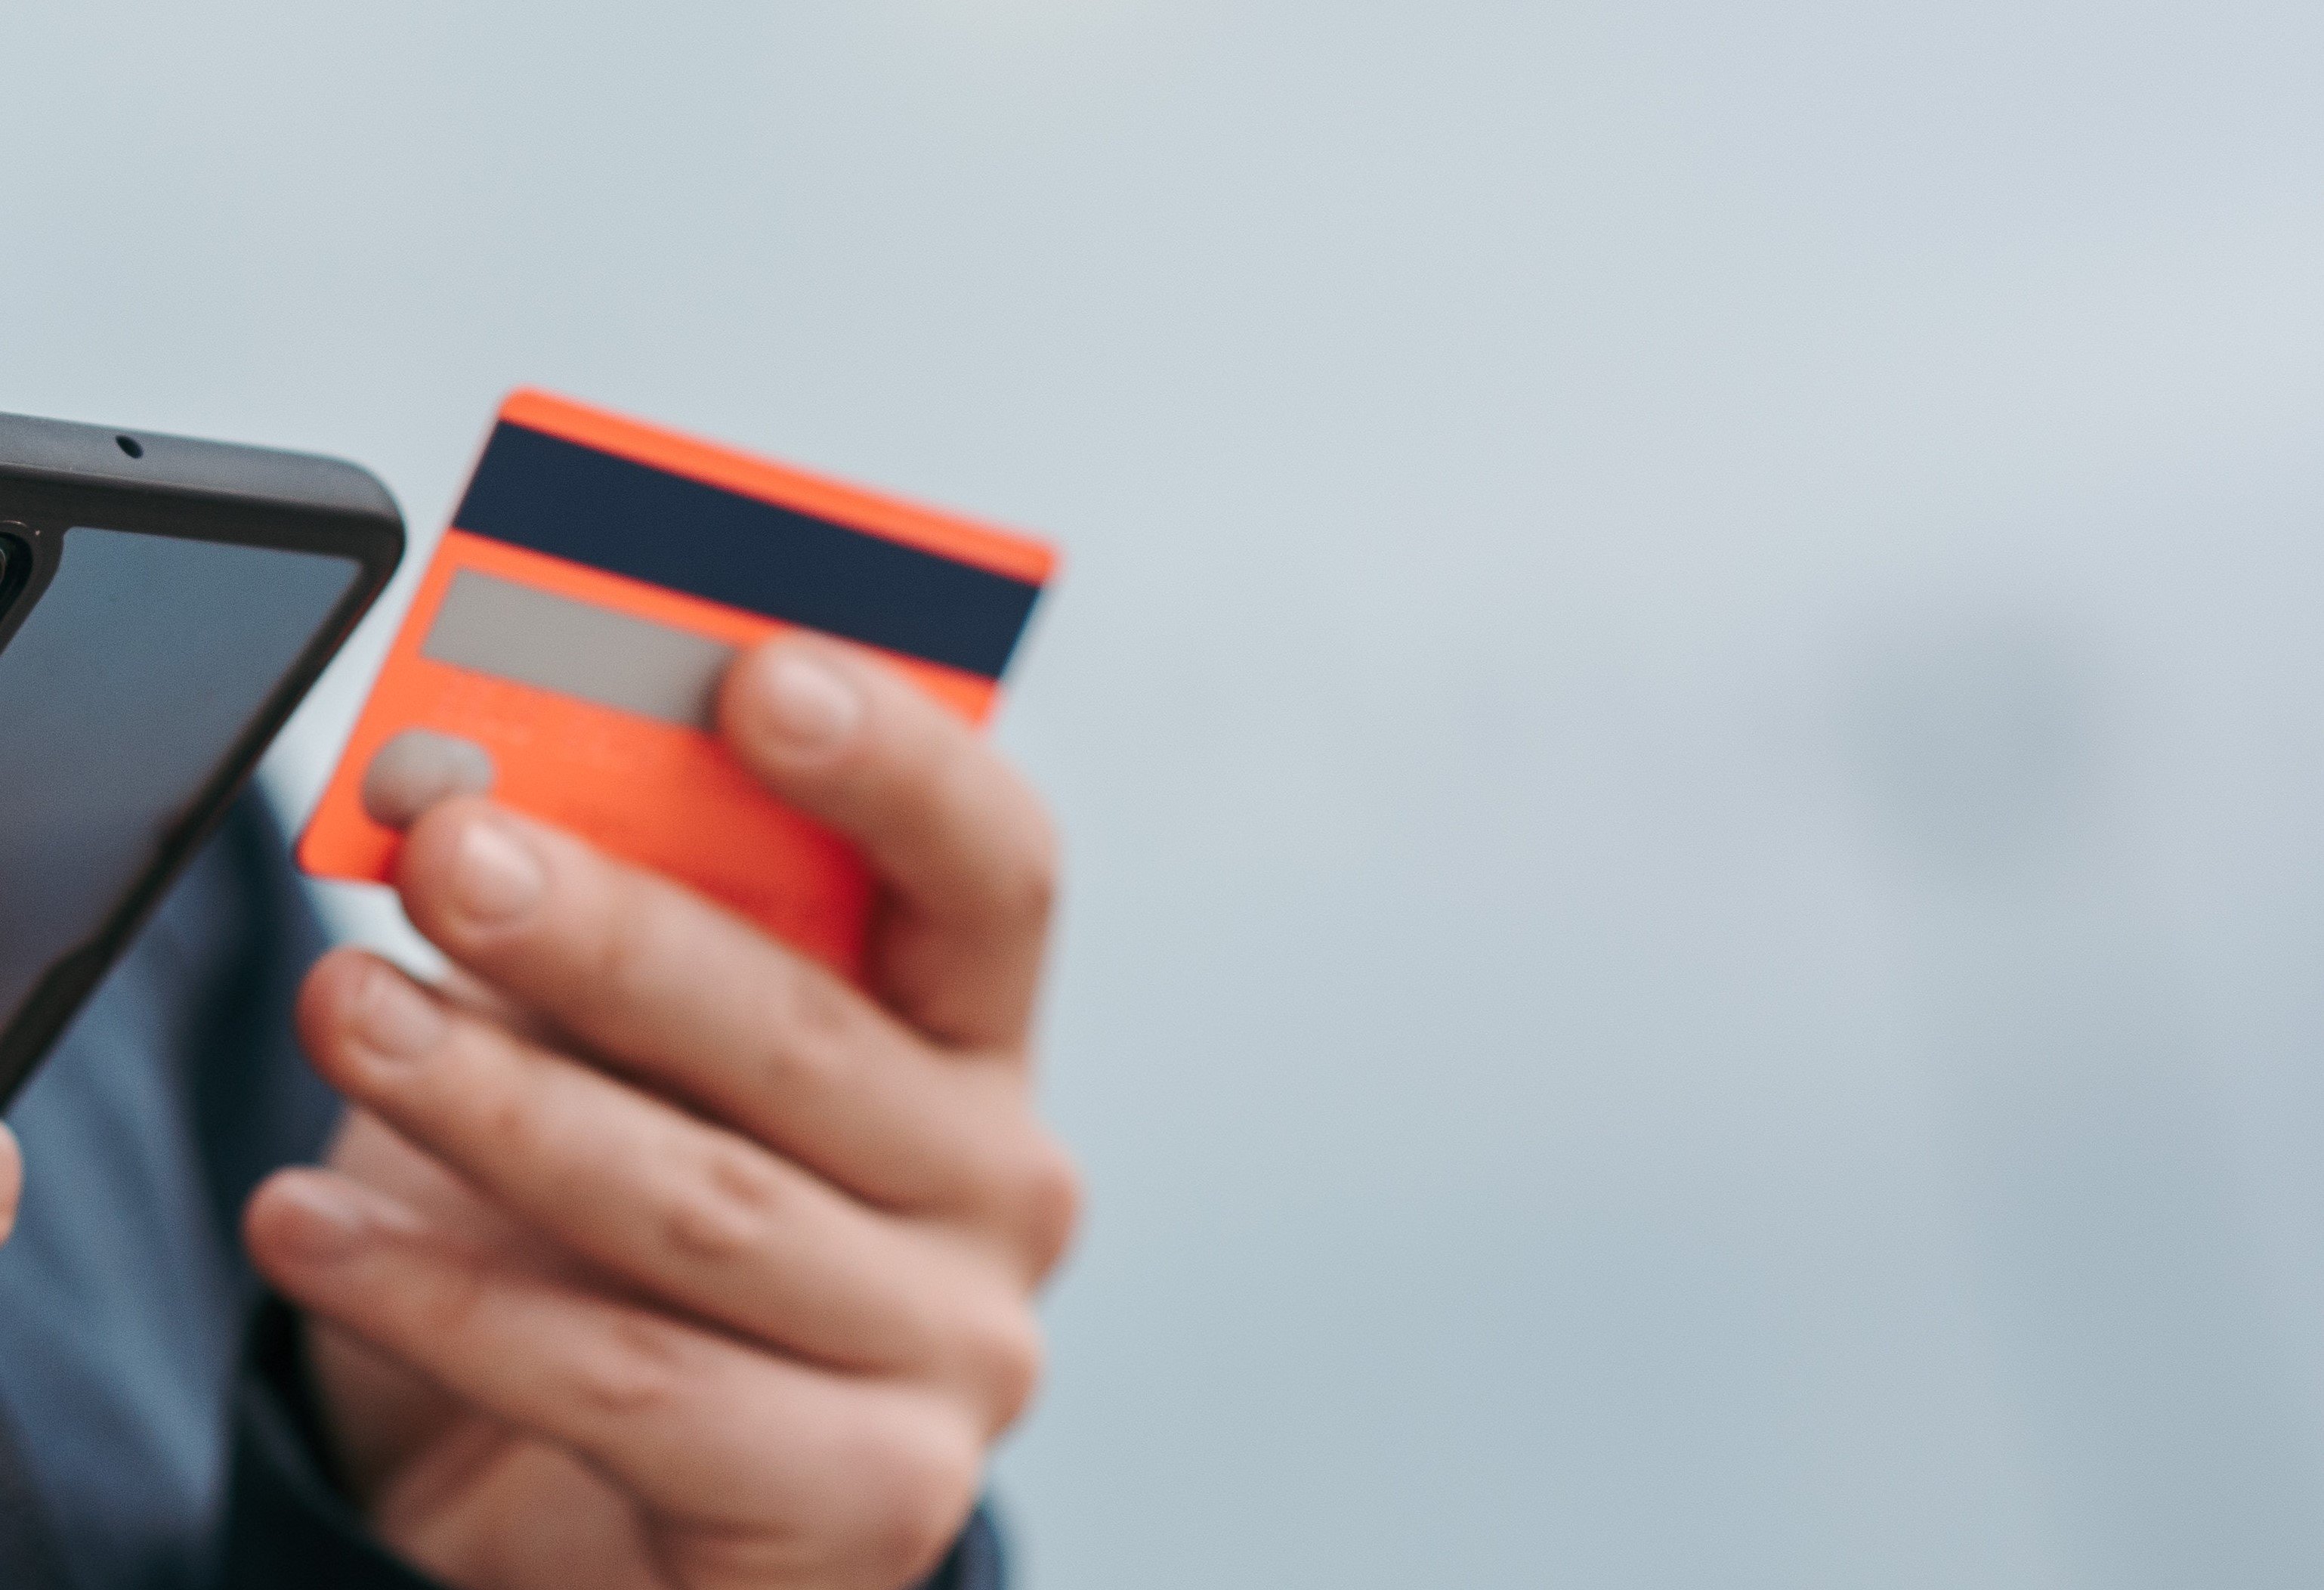 Tangerine Money-Back credit card gives you money back with no annual fee. Source: Pexels.